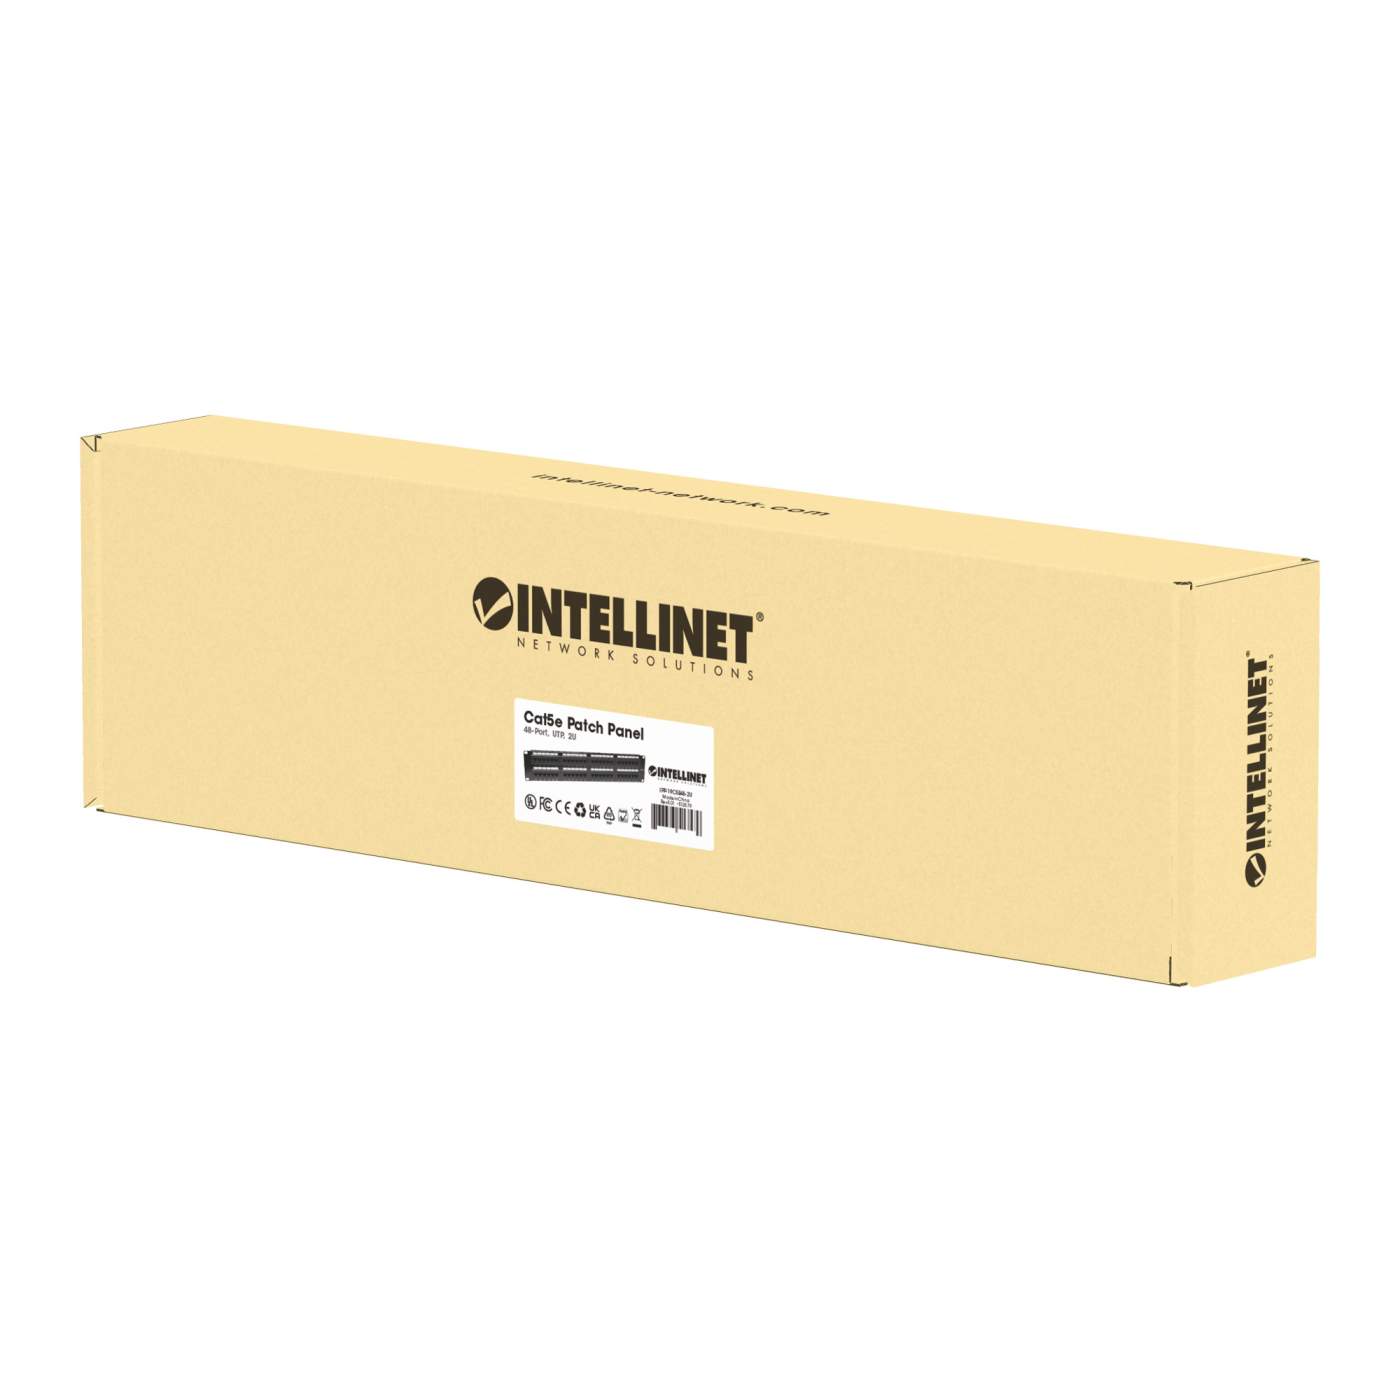 48-Port Cat5e Patchpanel Packaging Image 2